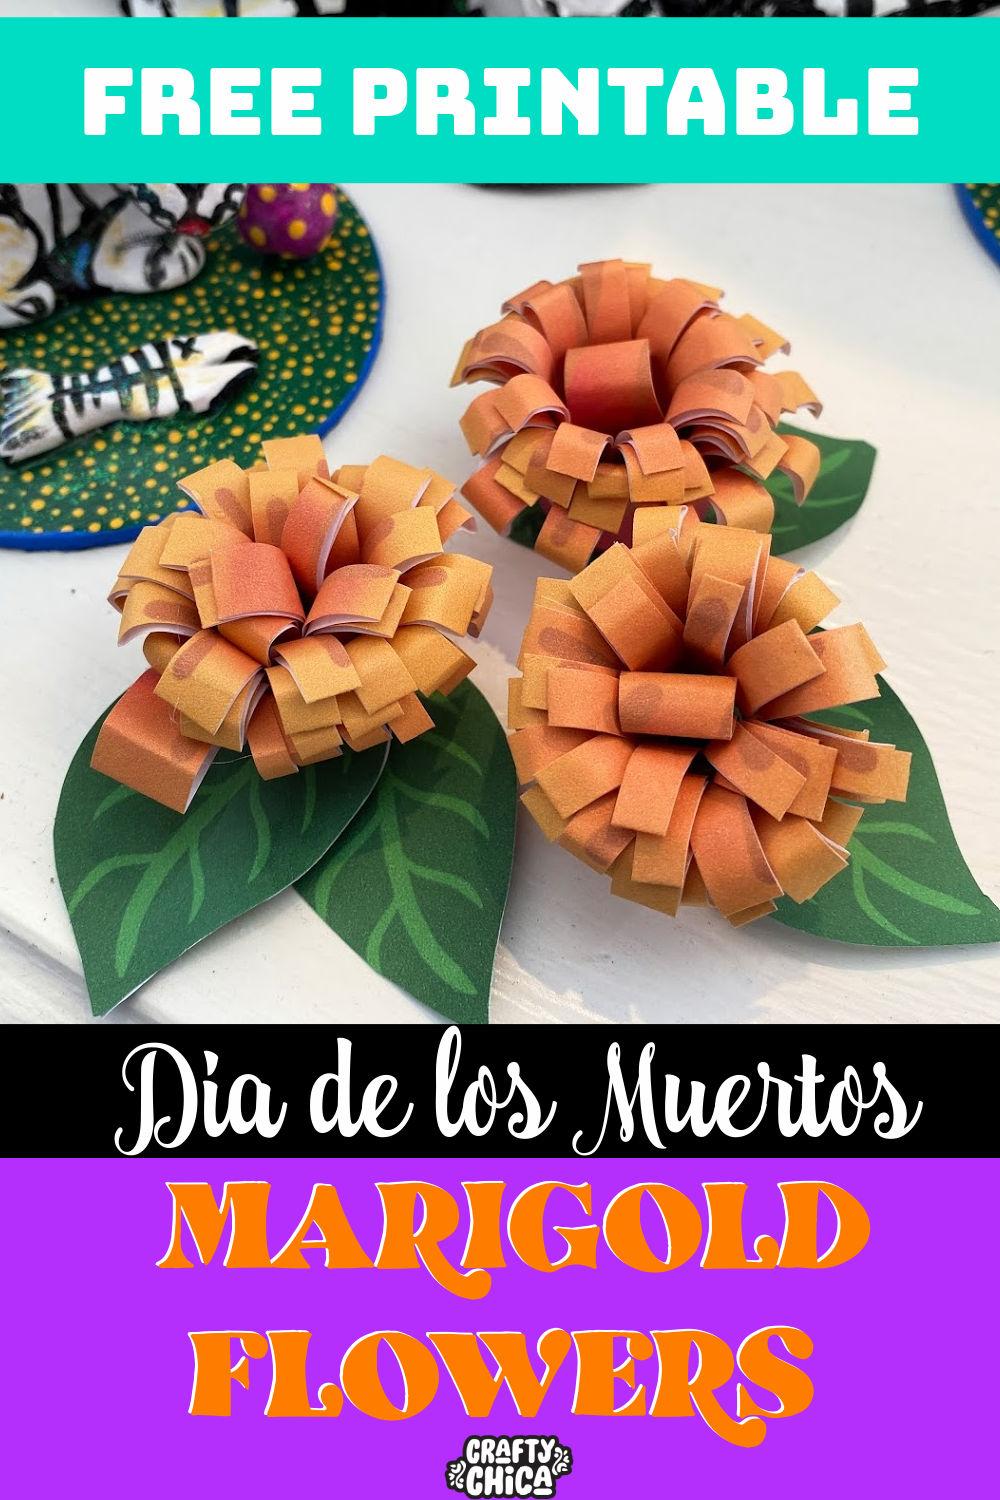 Free printable - the meaning of marigolds for Dia de Los Muertos